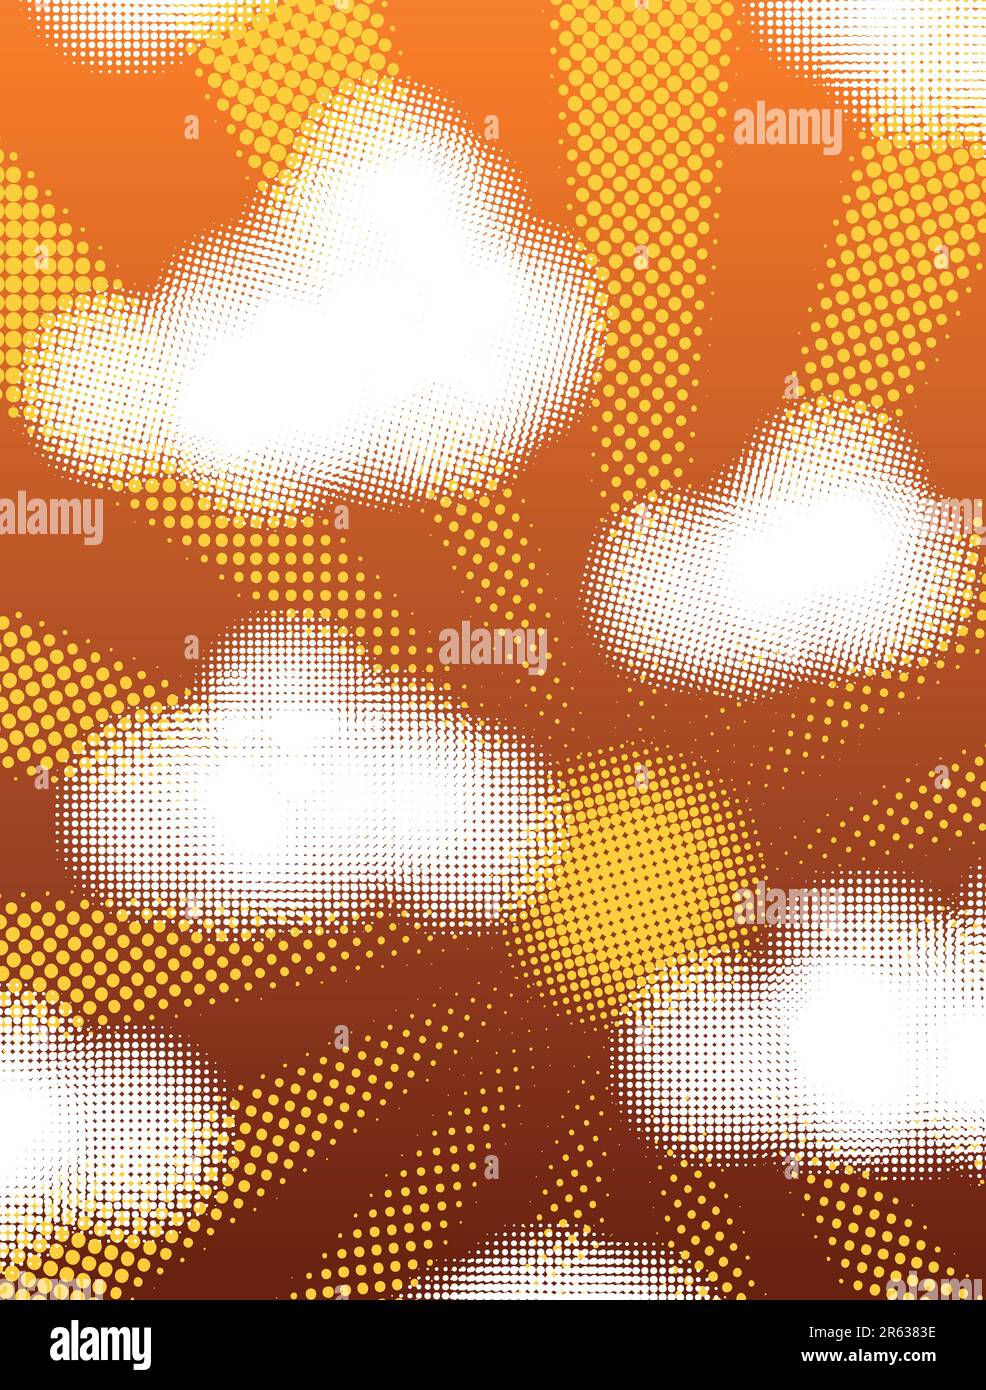 Editable vector design of halftone clouds and sunshine Stock Vector